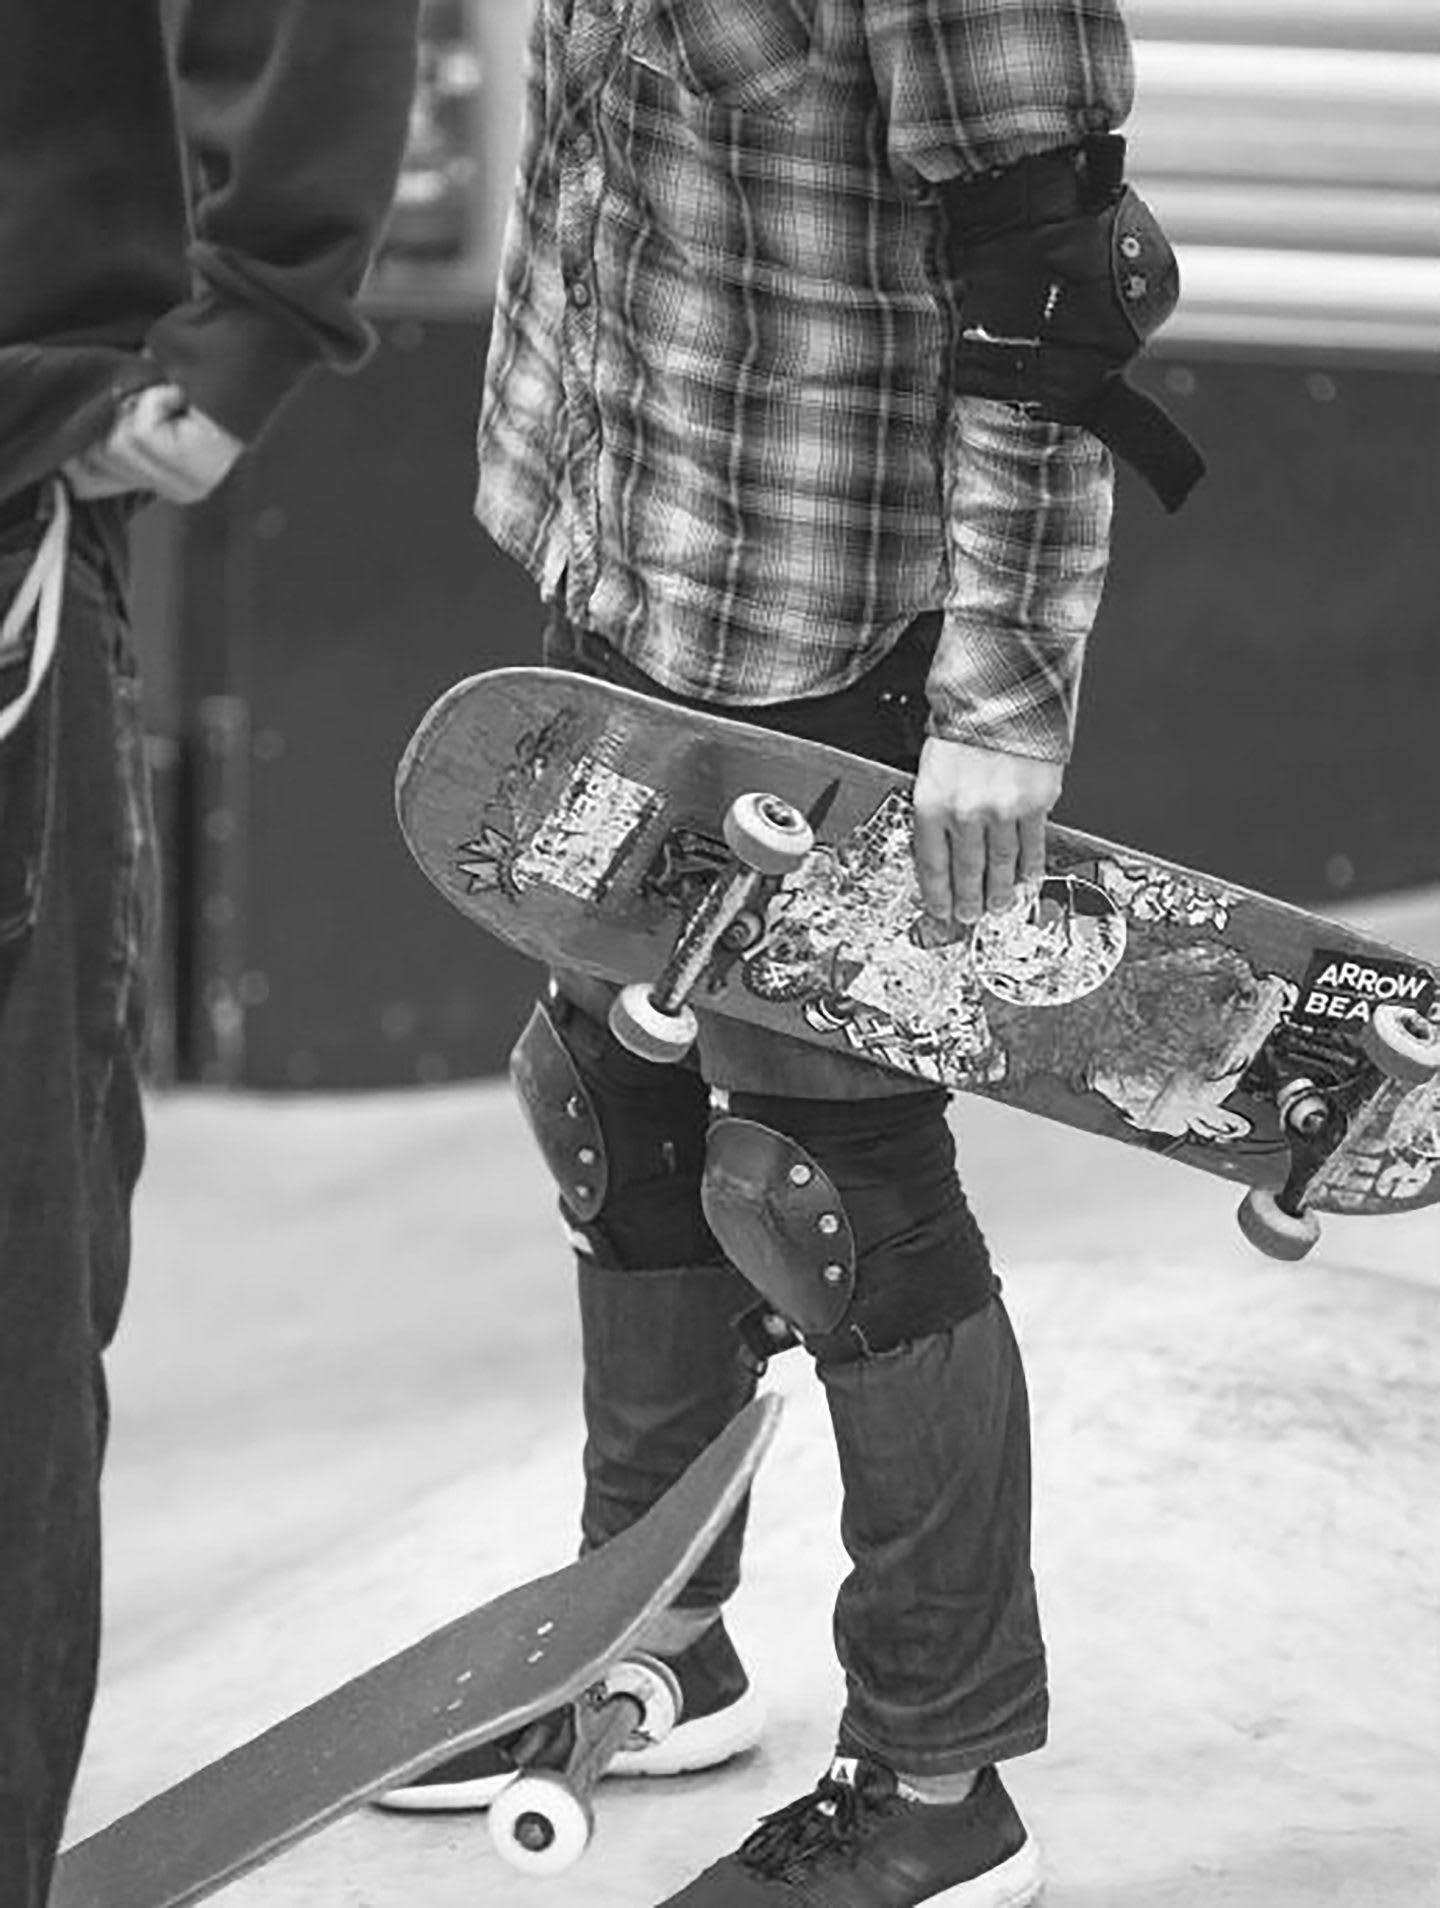 Black and white photo of a skater boy wearing protective knee and elbow pads getting ready to skate. skater, determination, skateboard, hobbies.,